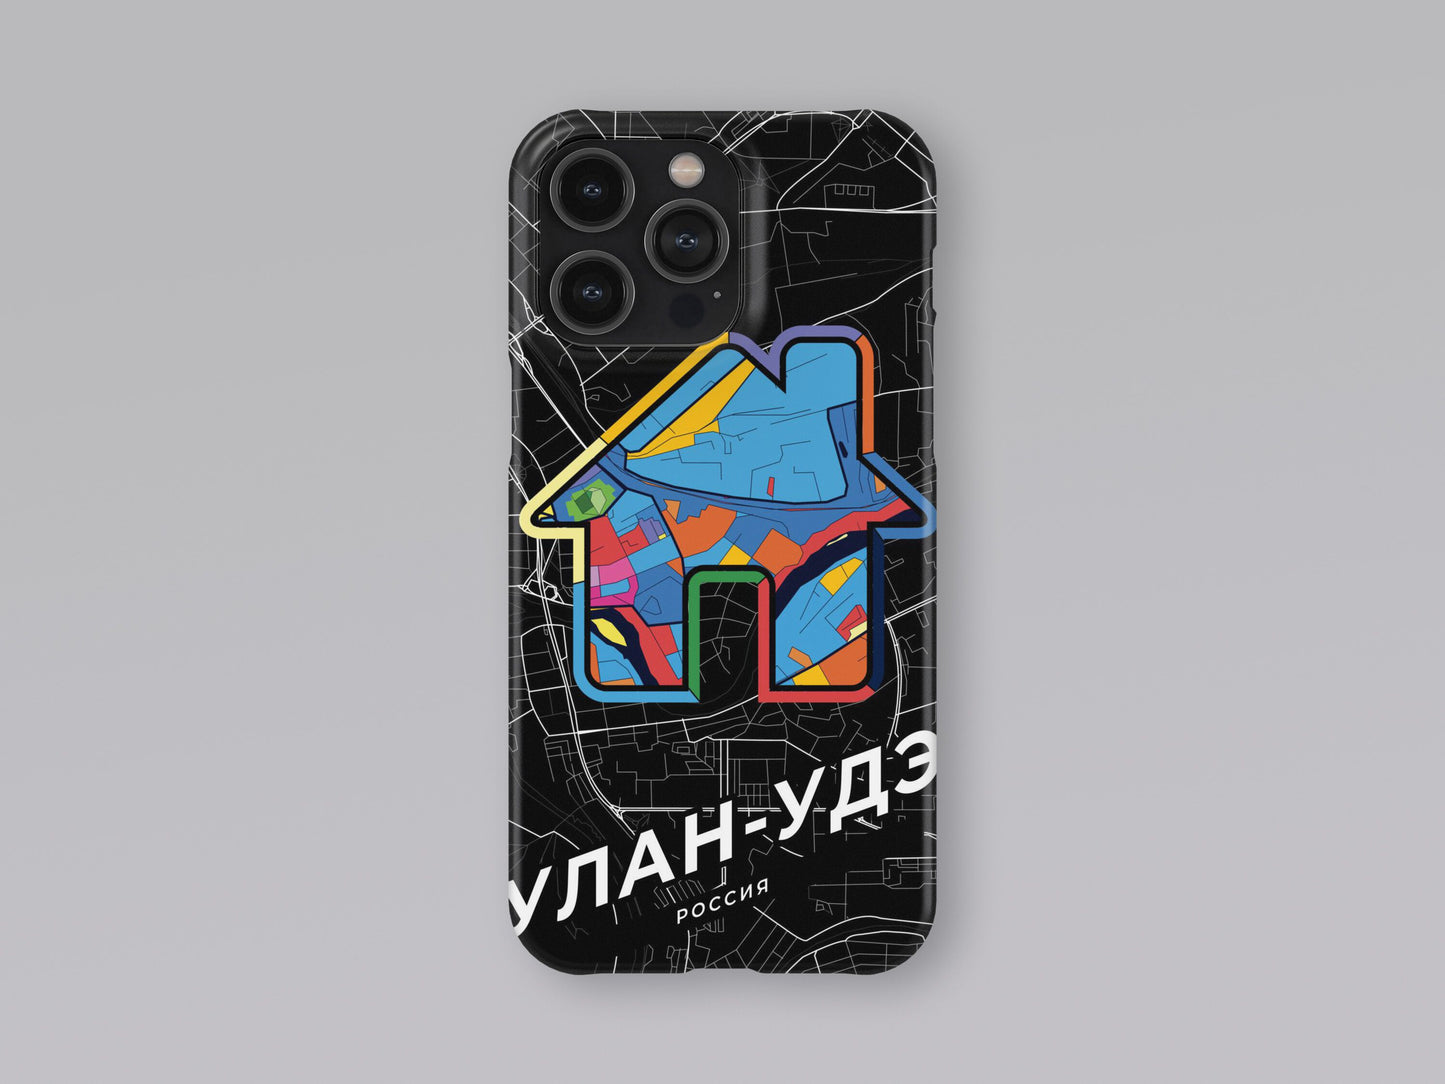 Ulan-Ude Russia slim phone case with colorful icon 3